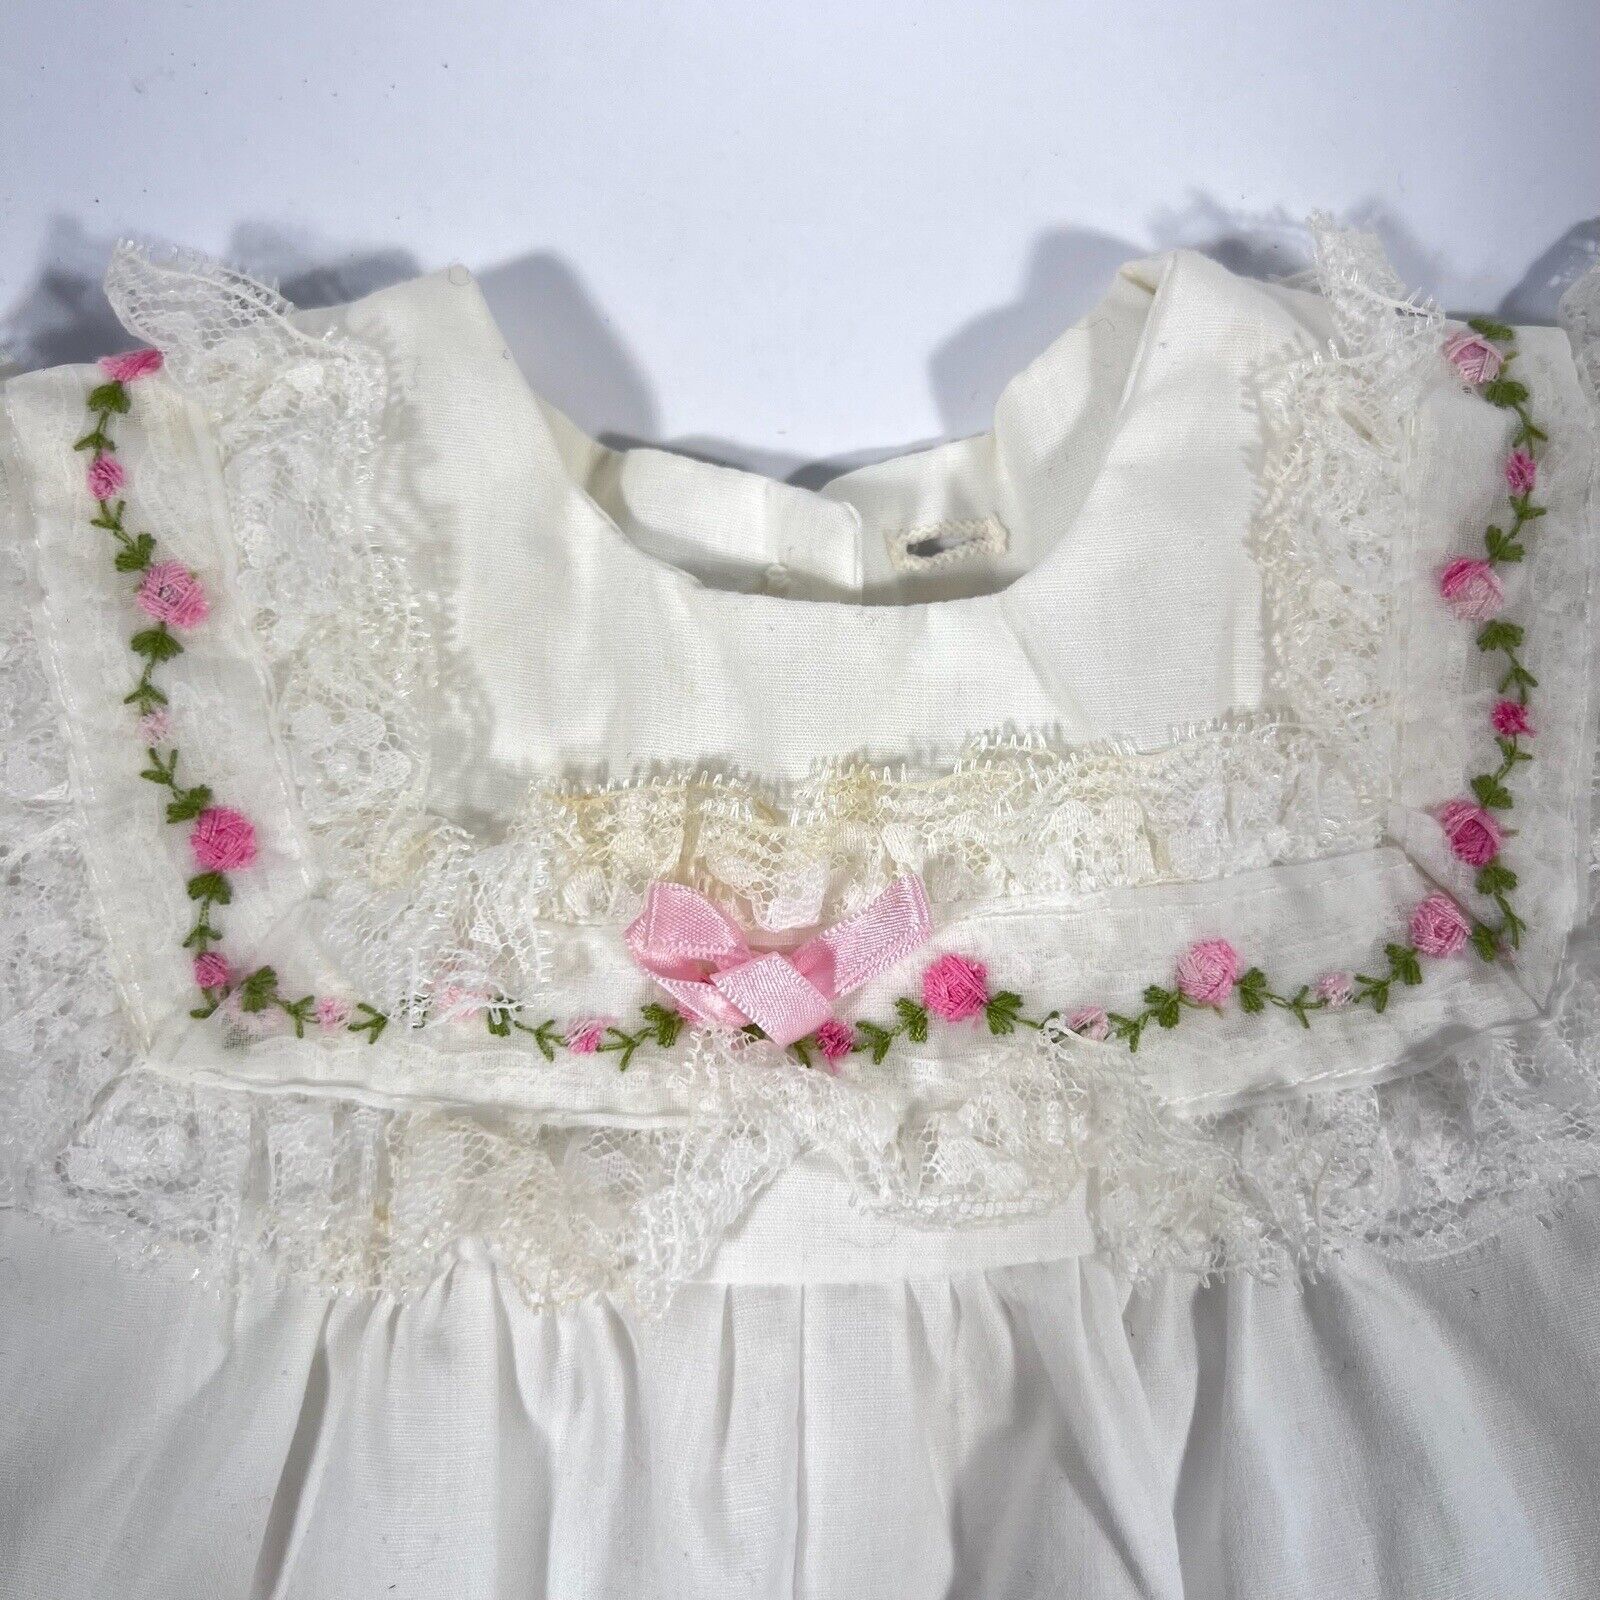 Vintage Alexis Christening Gown Infant Baby 6 Months Romper Made in the USA